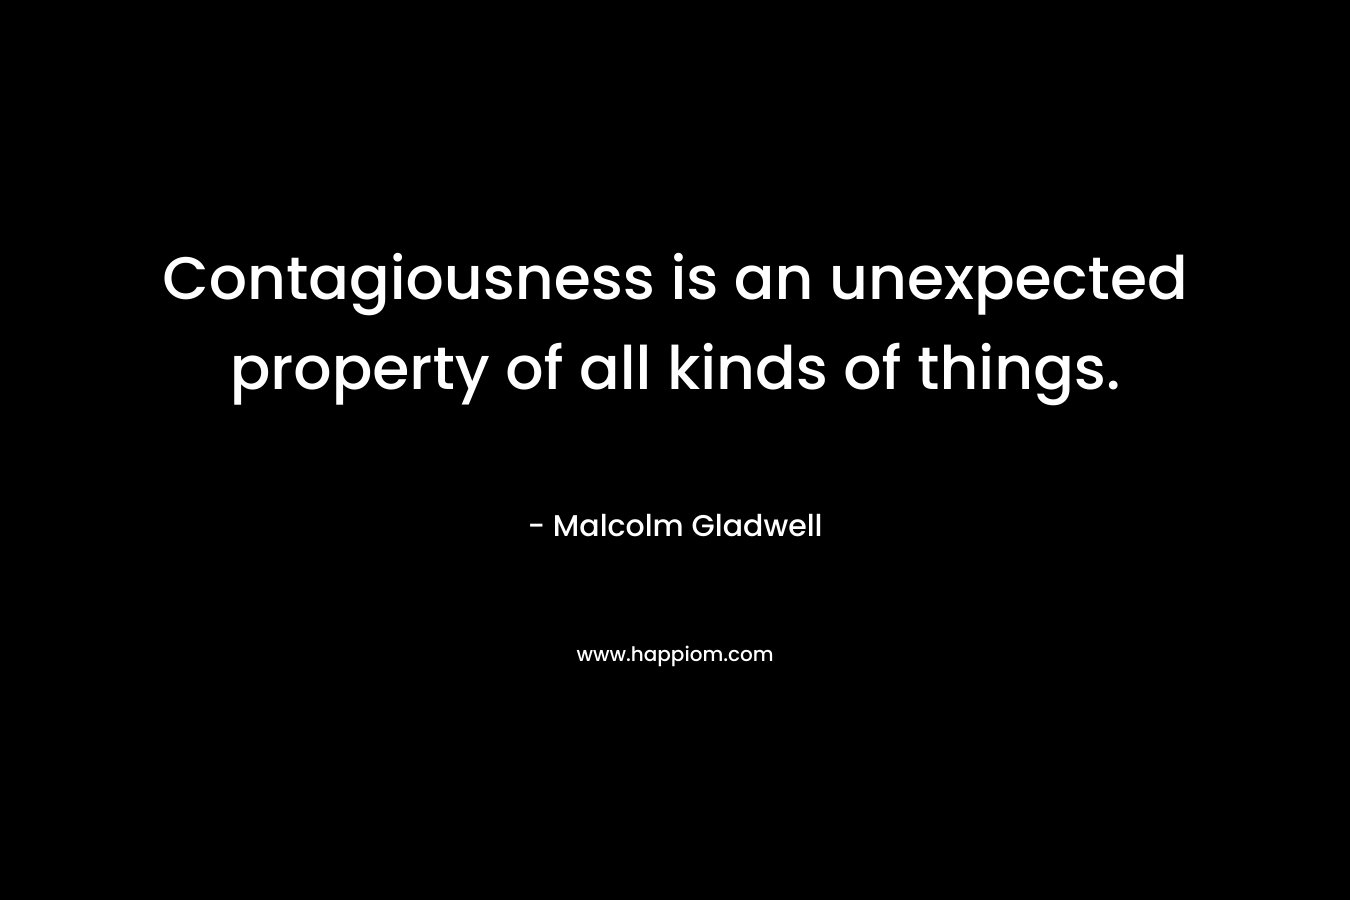 Contagiousness is an unexpected property of all kinds of things.